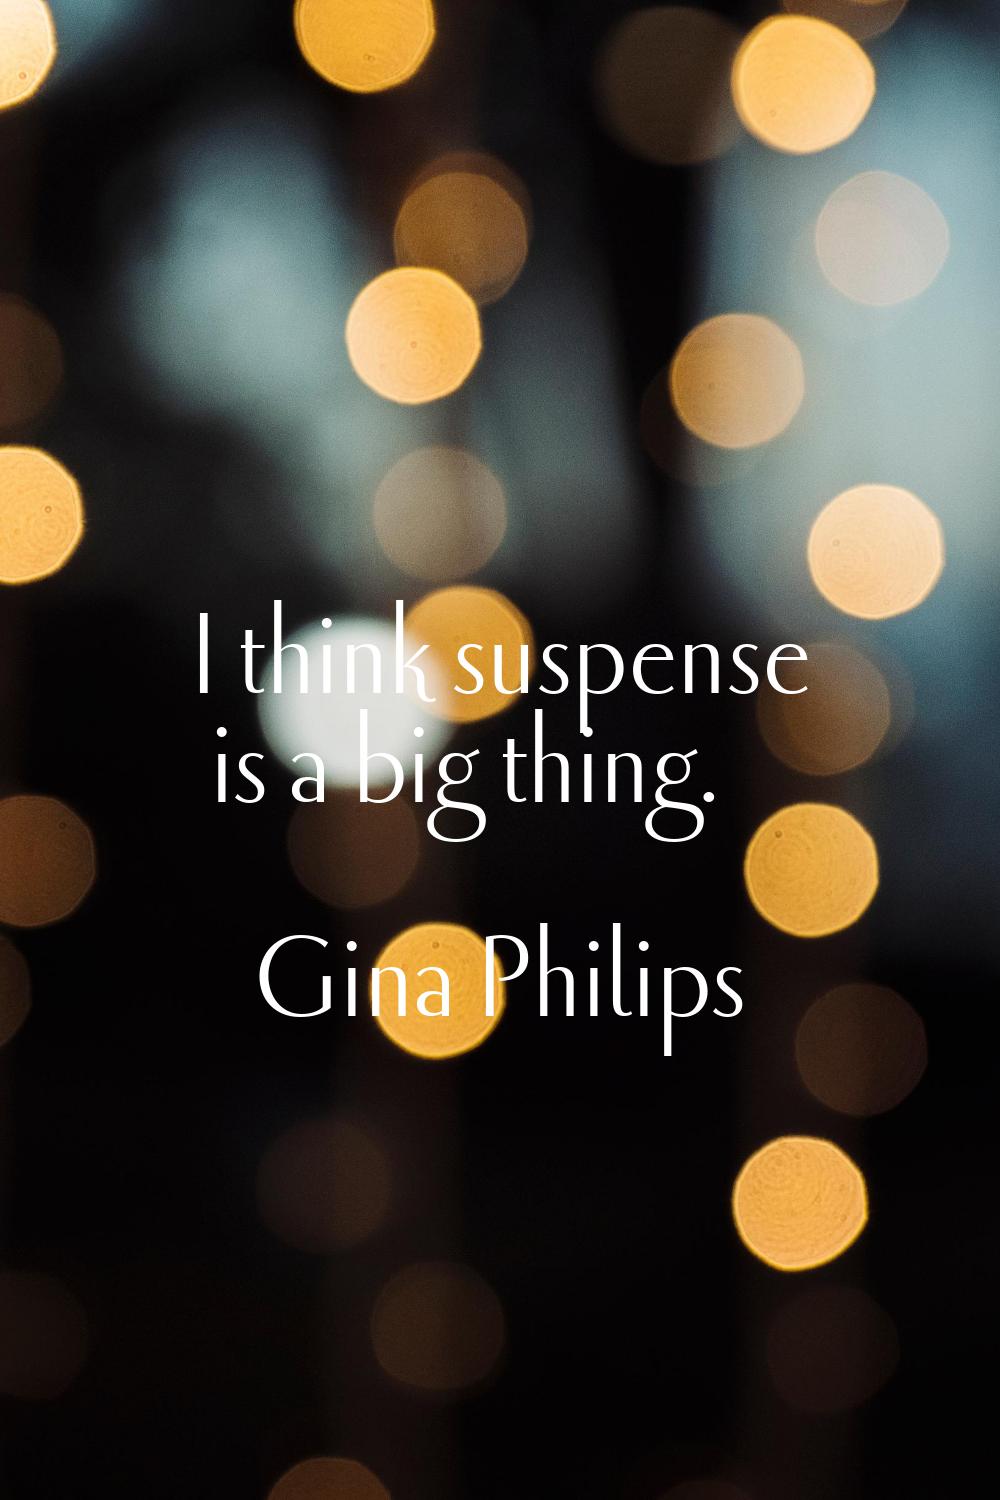 I think suspense is a big thing.